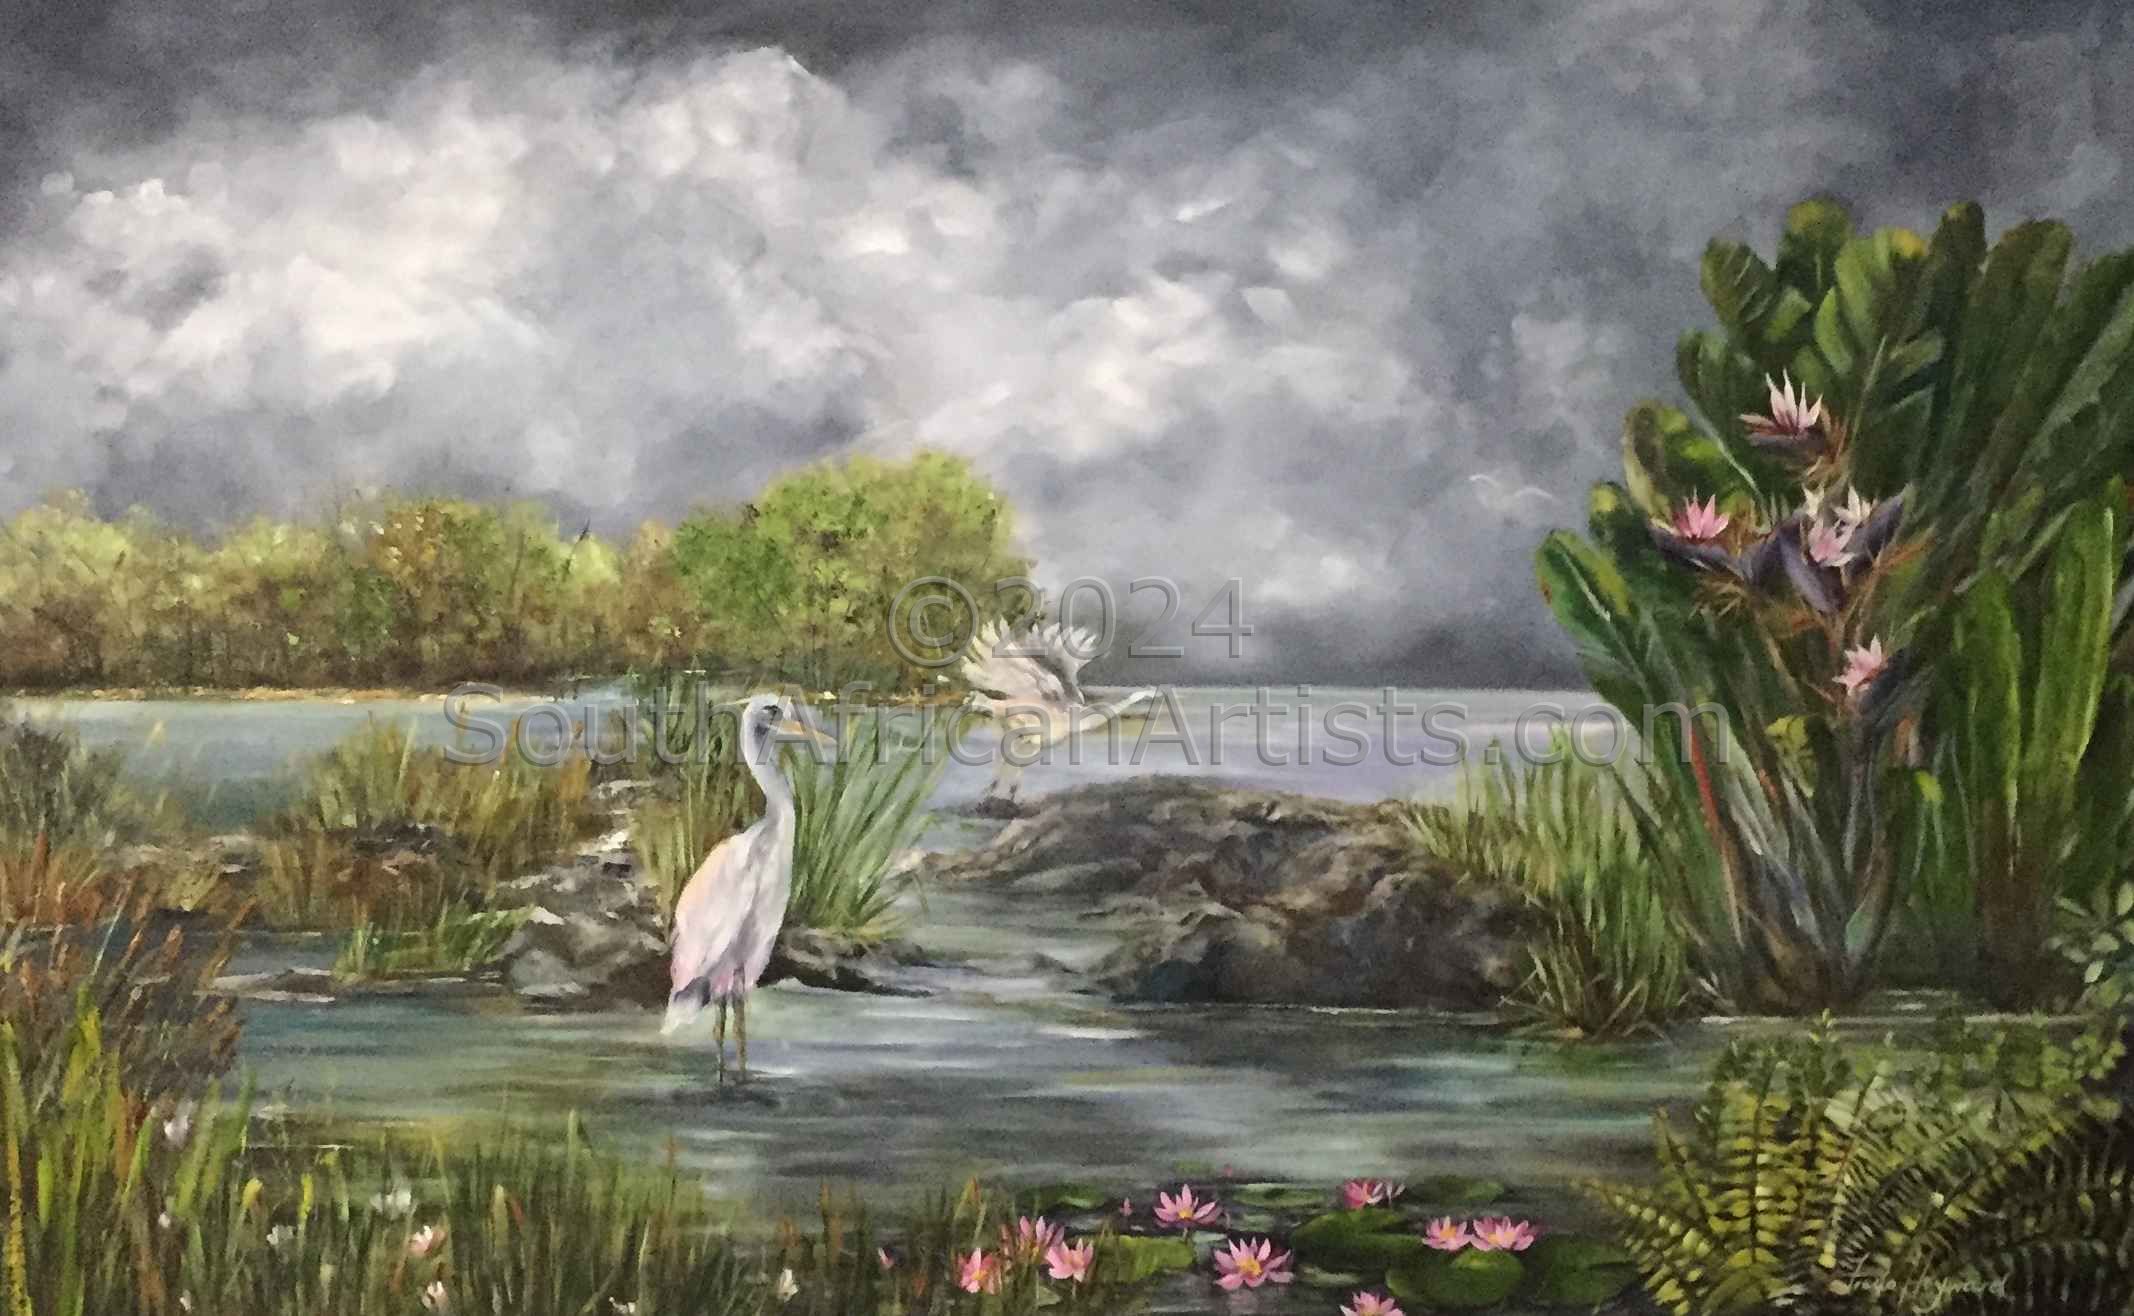 The Heron and the Storm